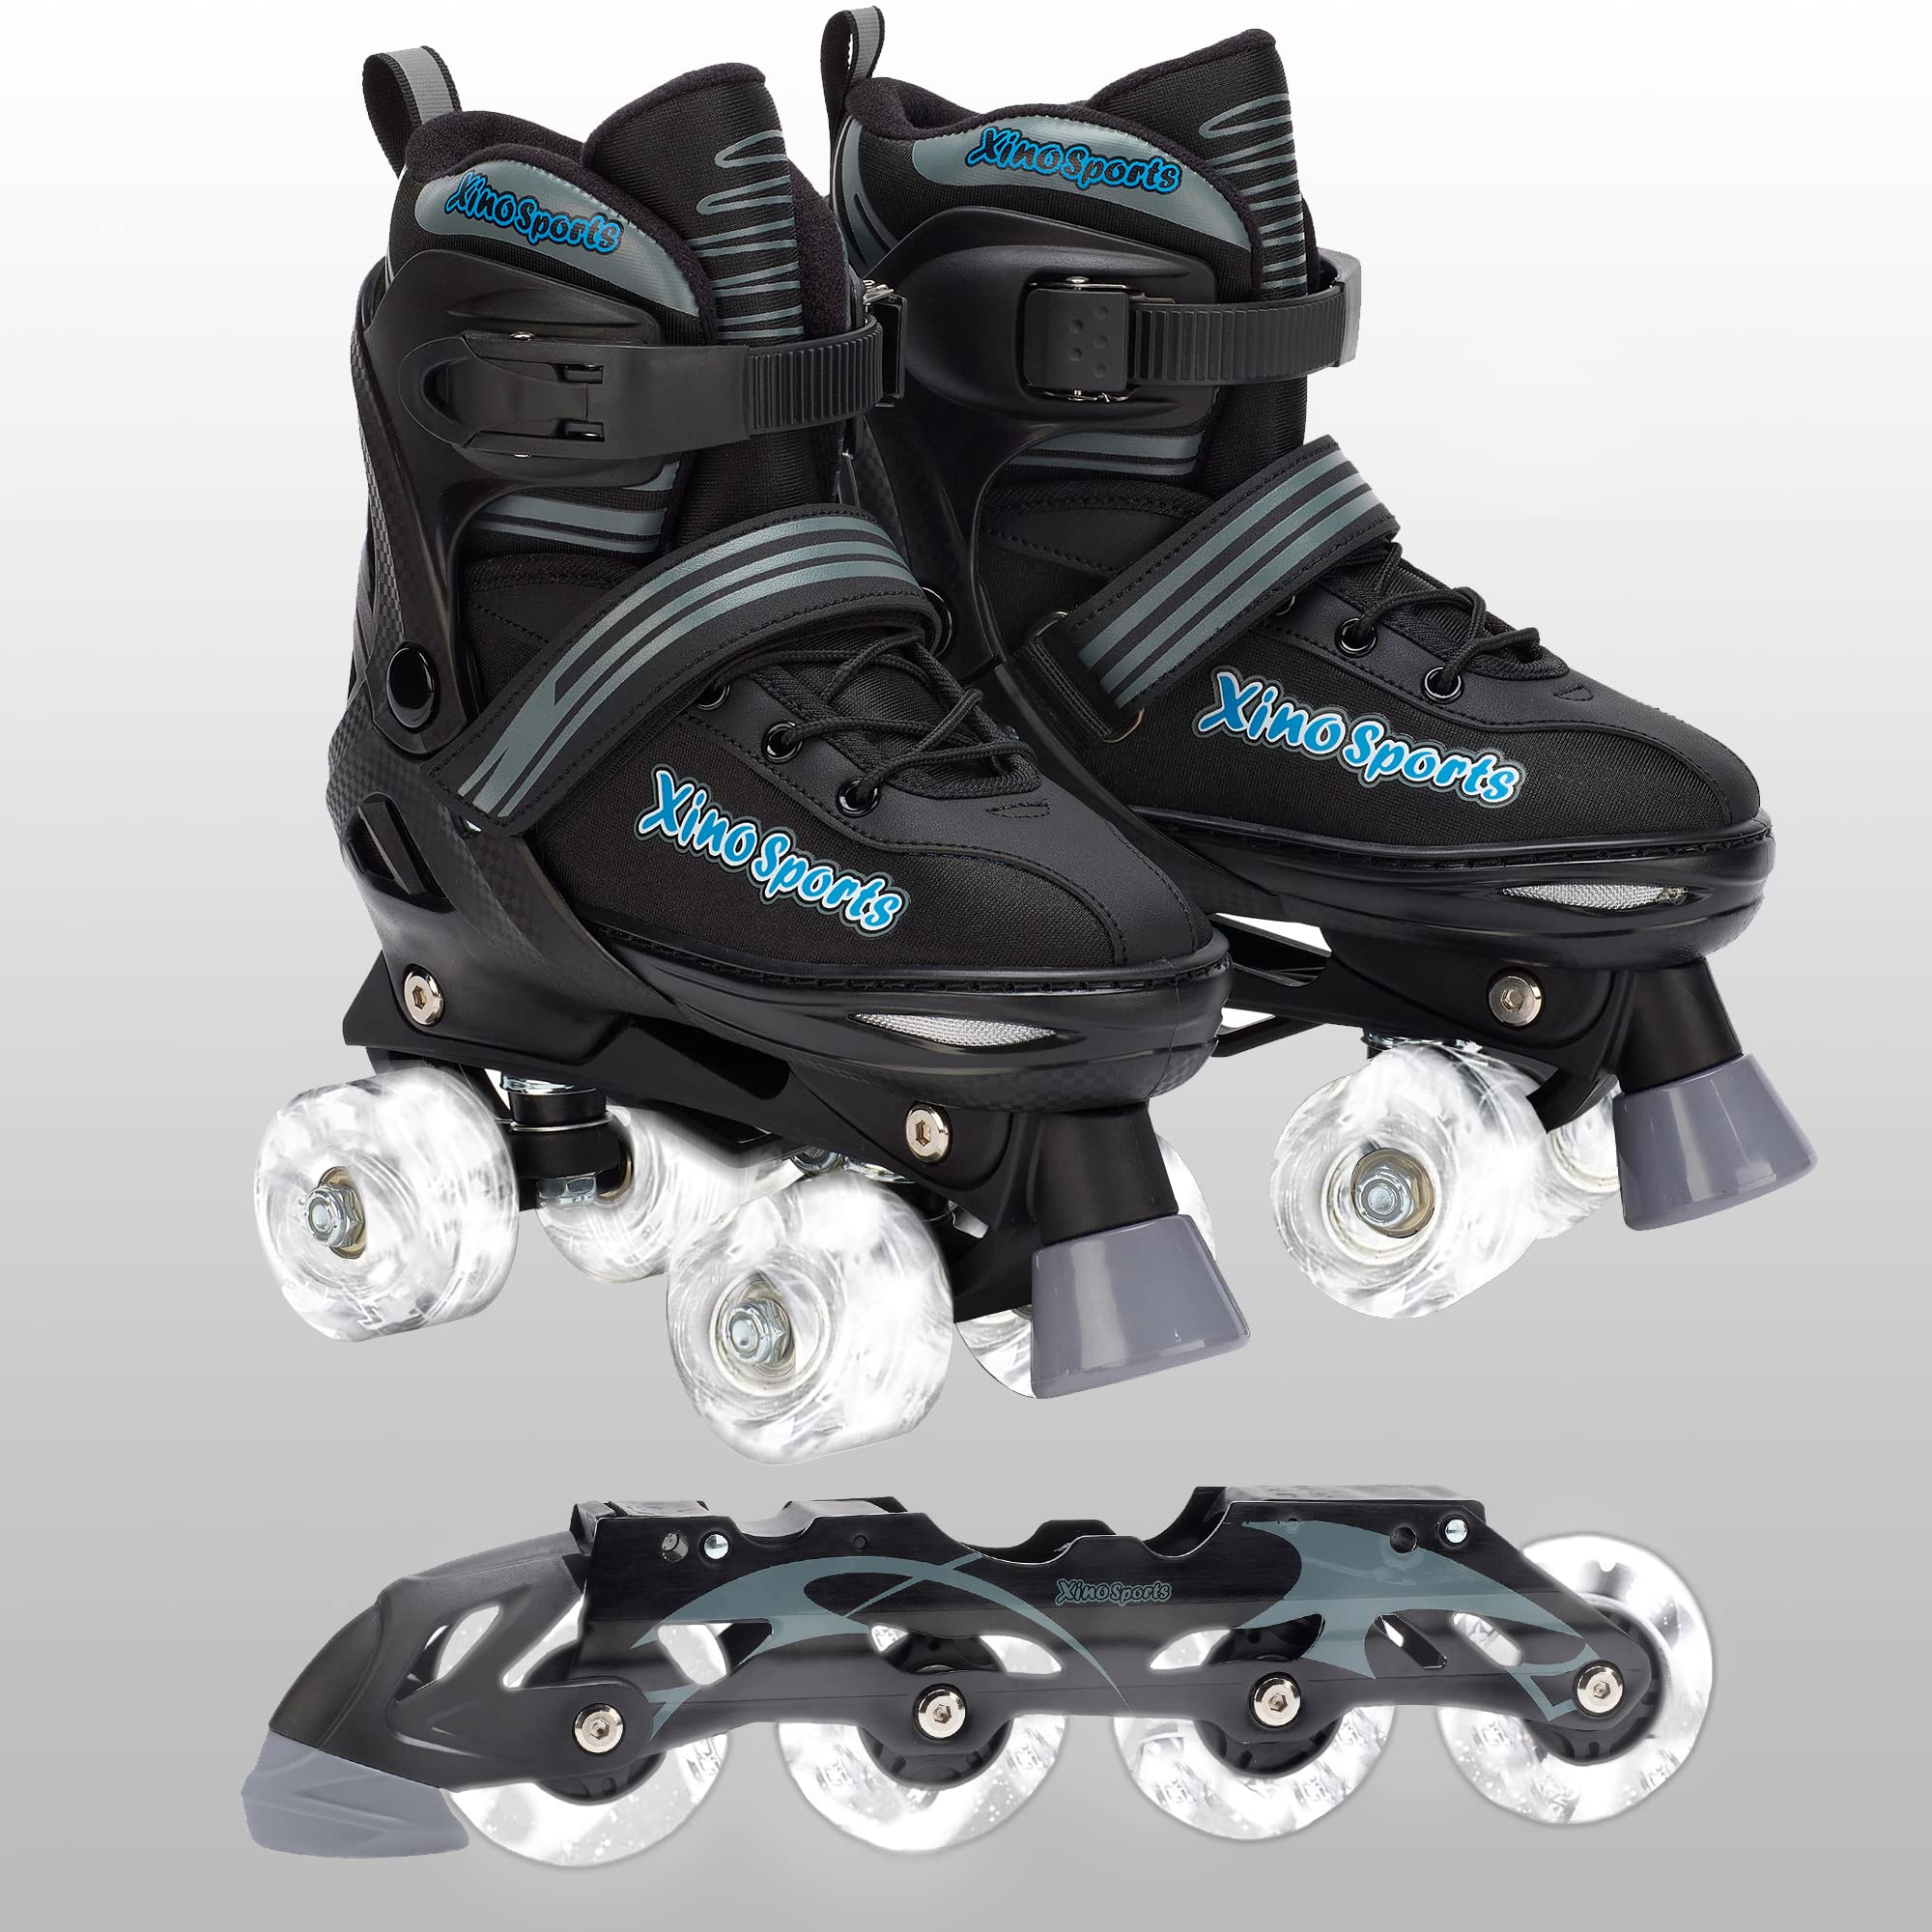 Combo skates for boys - adjustable and light up - Xino Sports